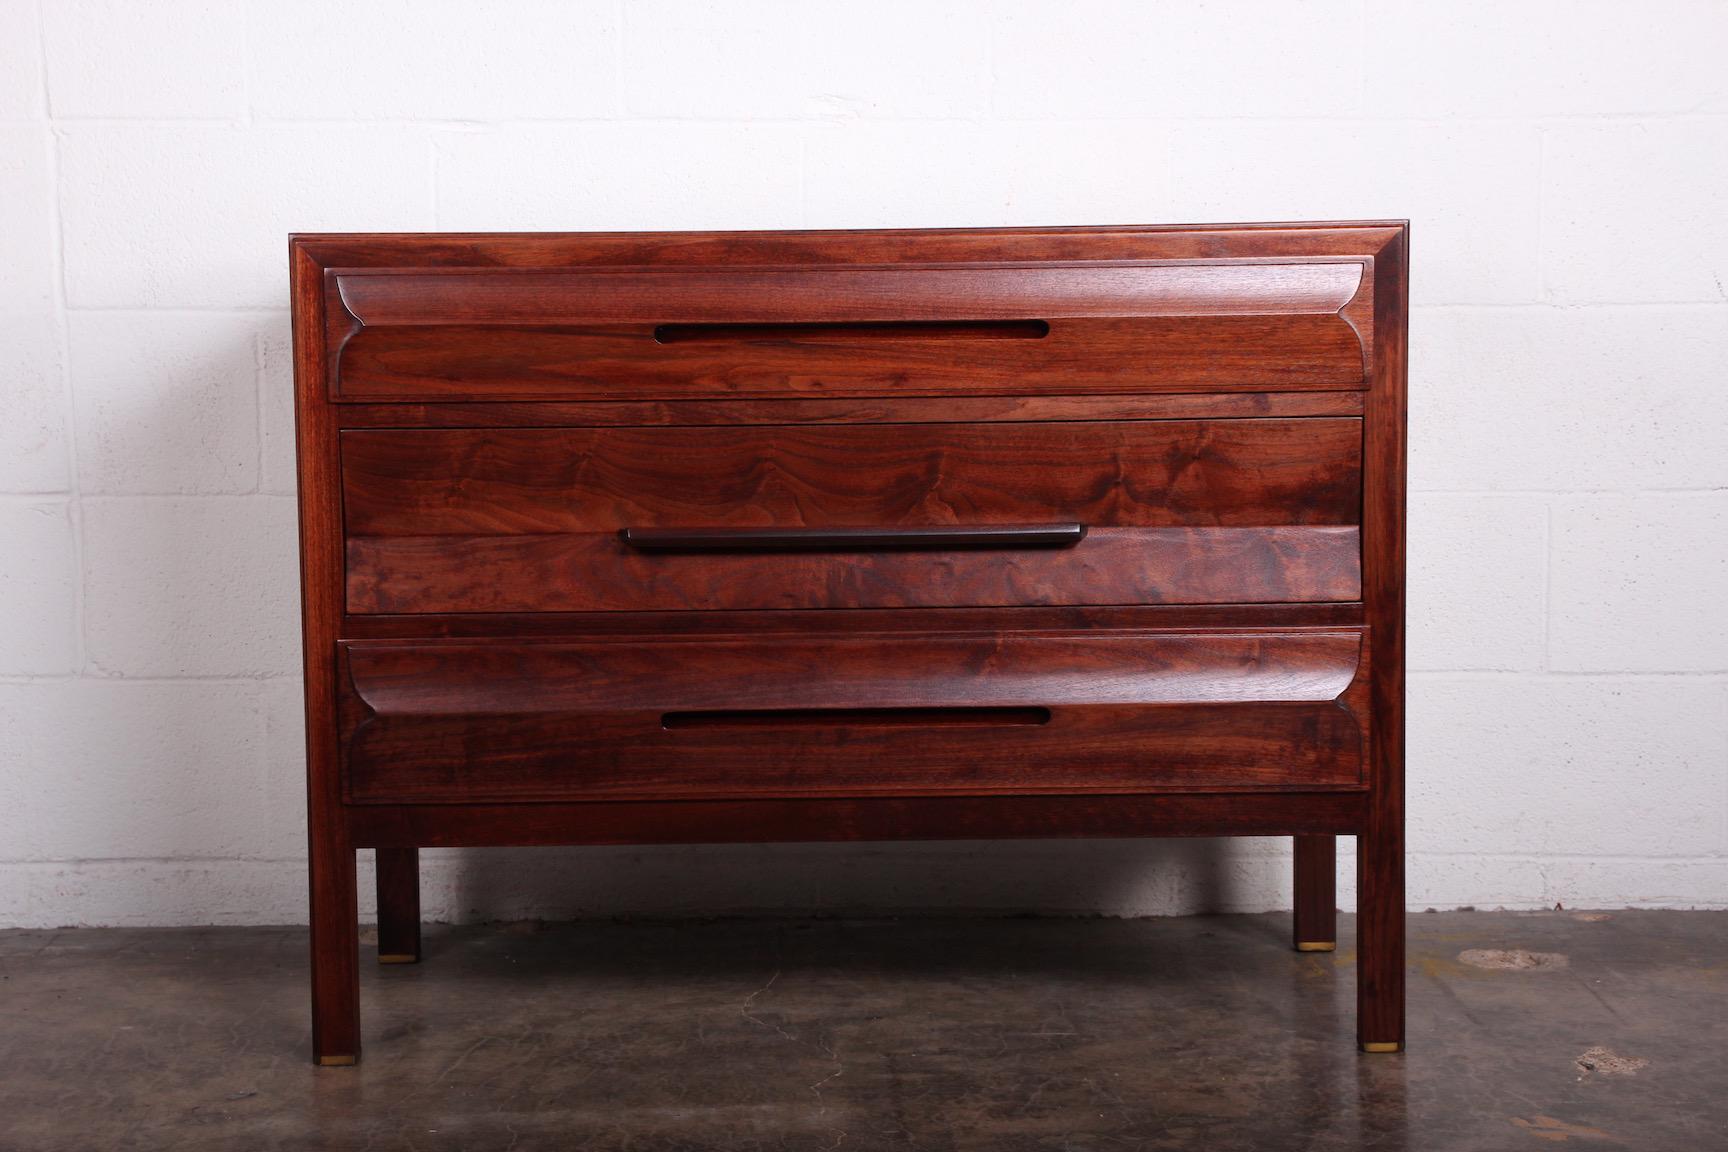 A walnut dresser with rosewood handle and brass feet. Designed by Edward Wormley for Dunbar.